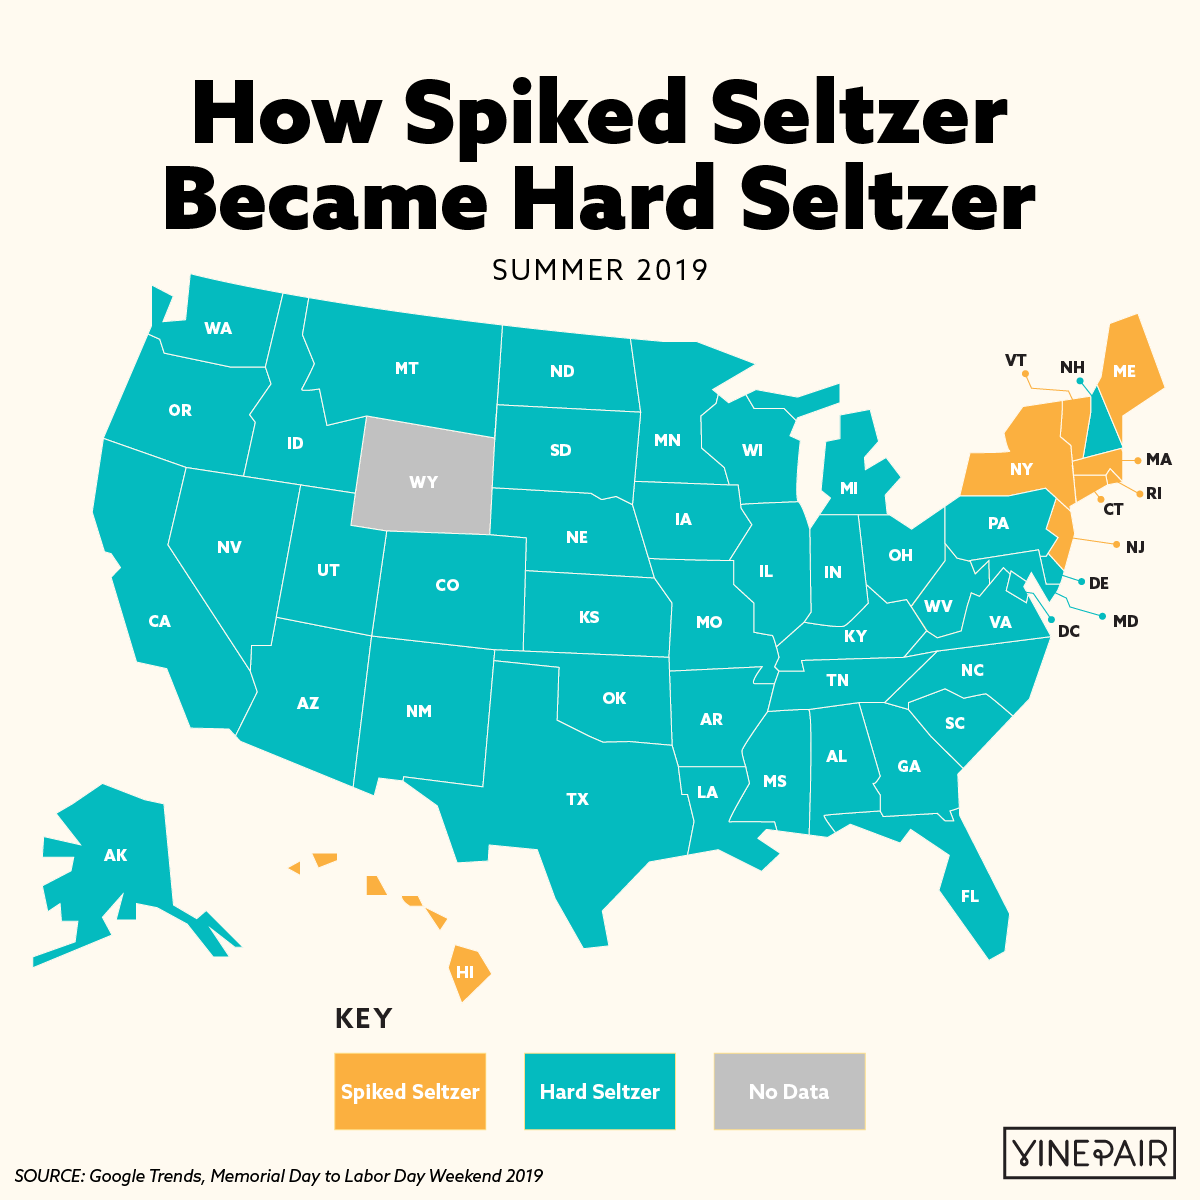 How Spiked Seltzer Became Hard Seltzer - State by State Map Summer 2019